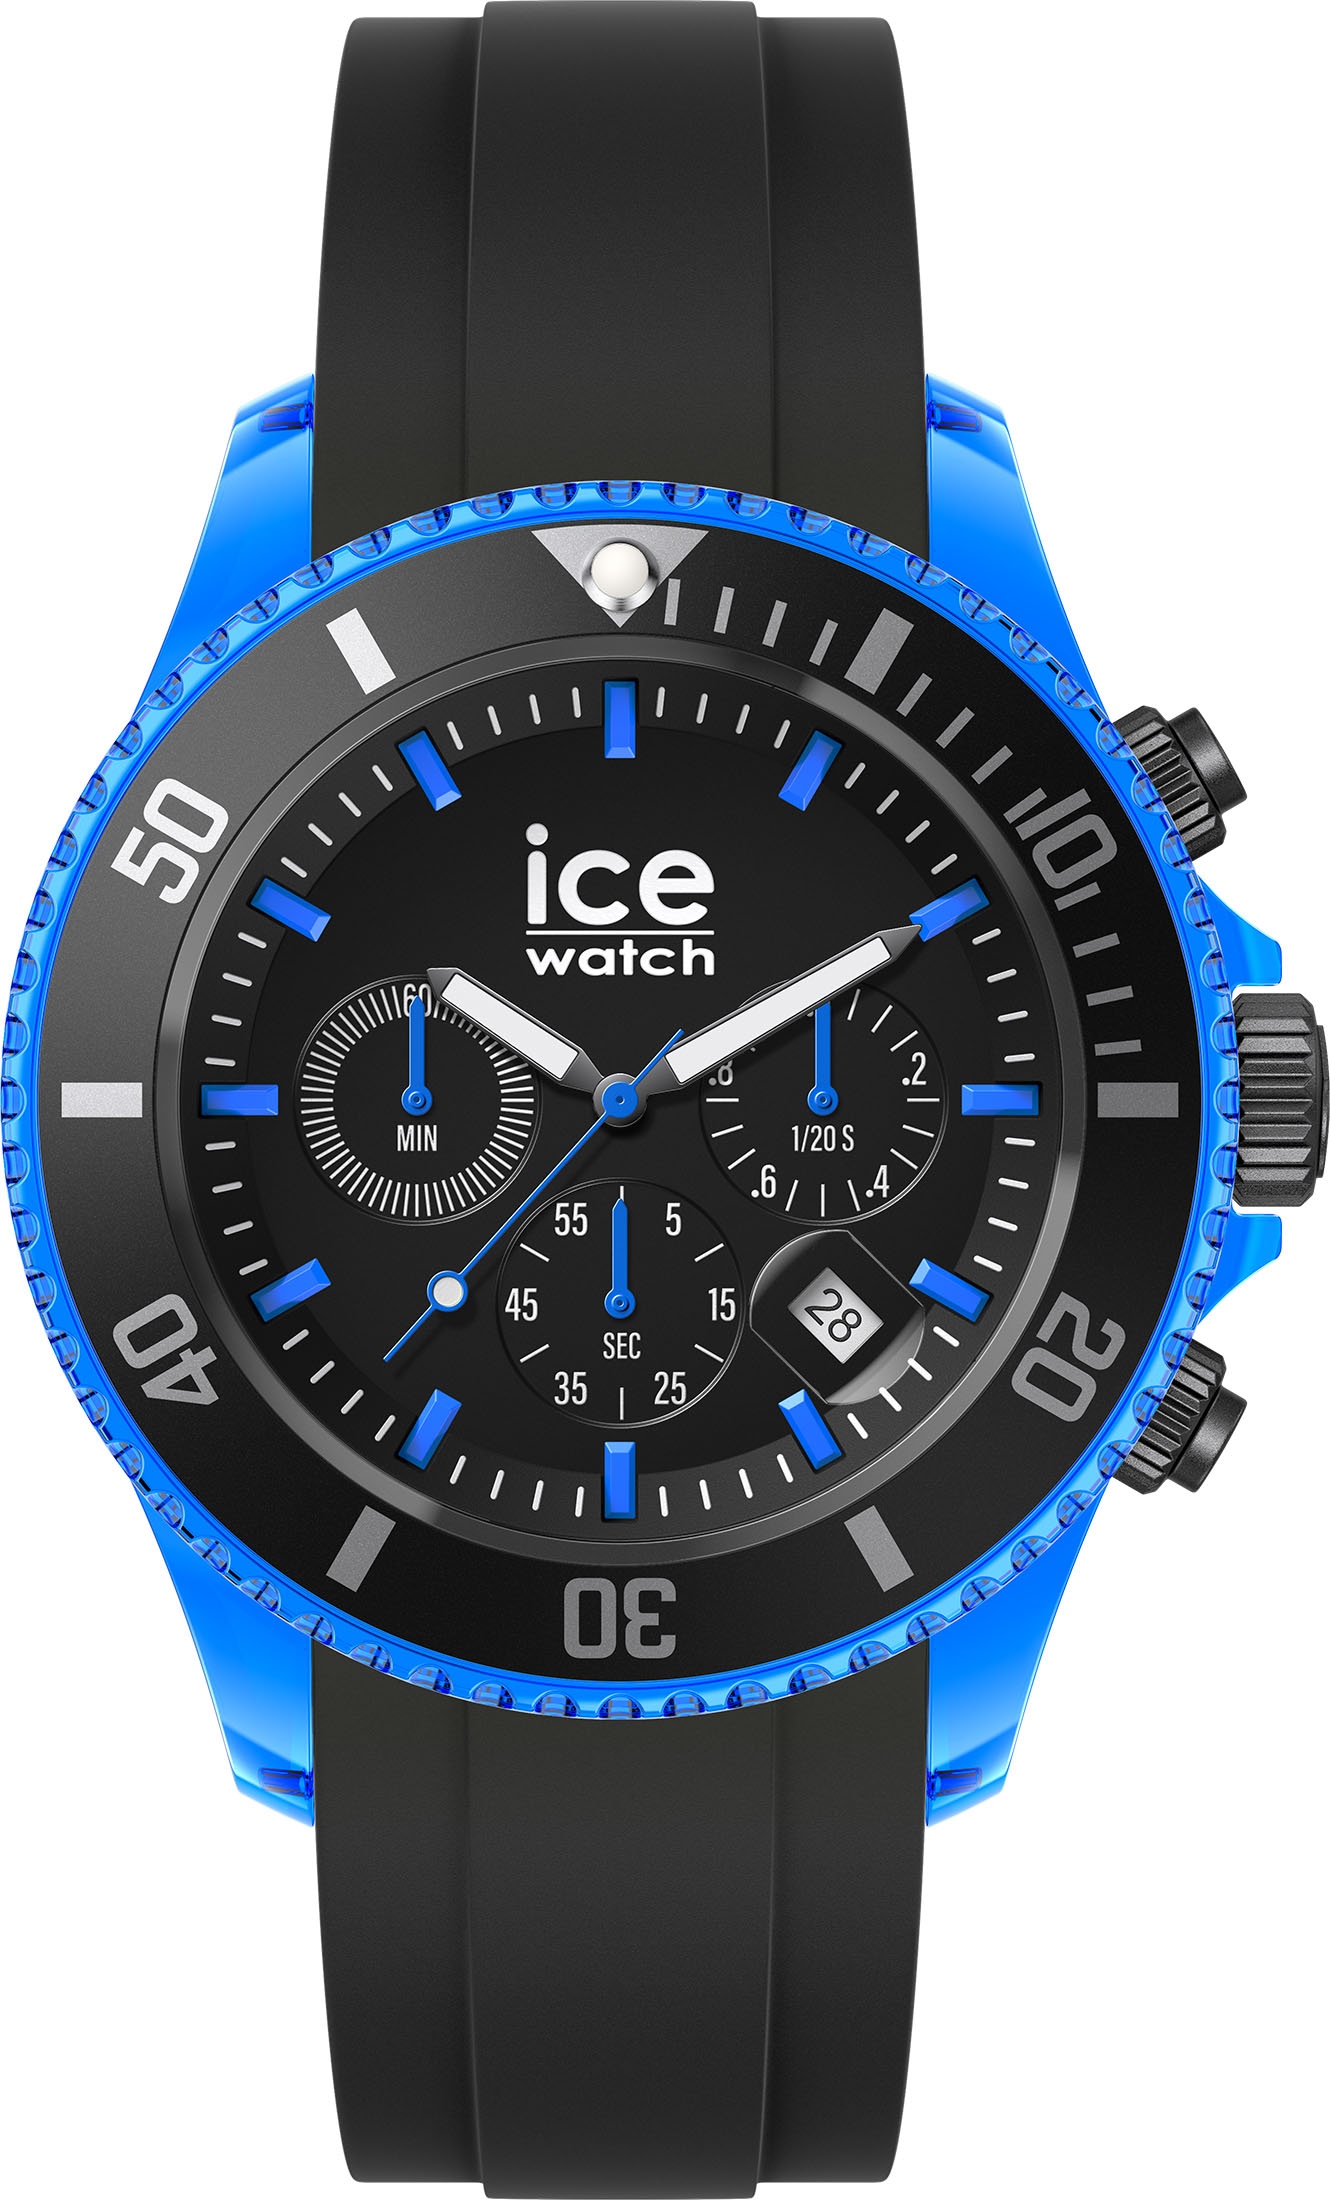 large »ICE - online CH, Black - Chronograph 019844« ice-watch bei OTTO shoppen Extra - chrono blue